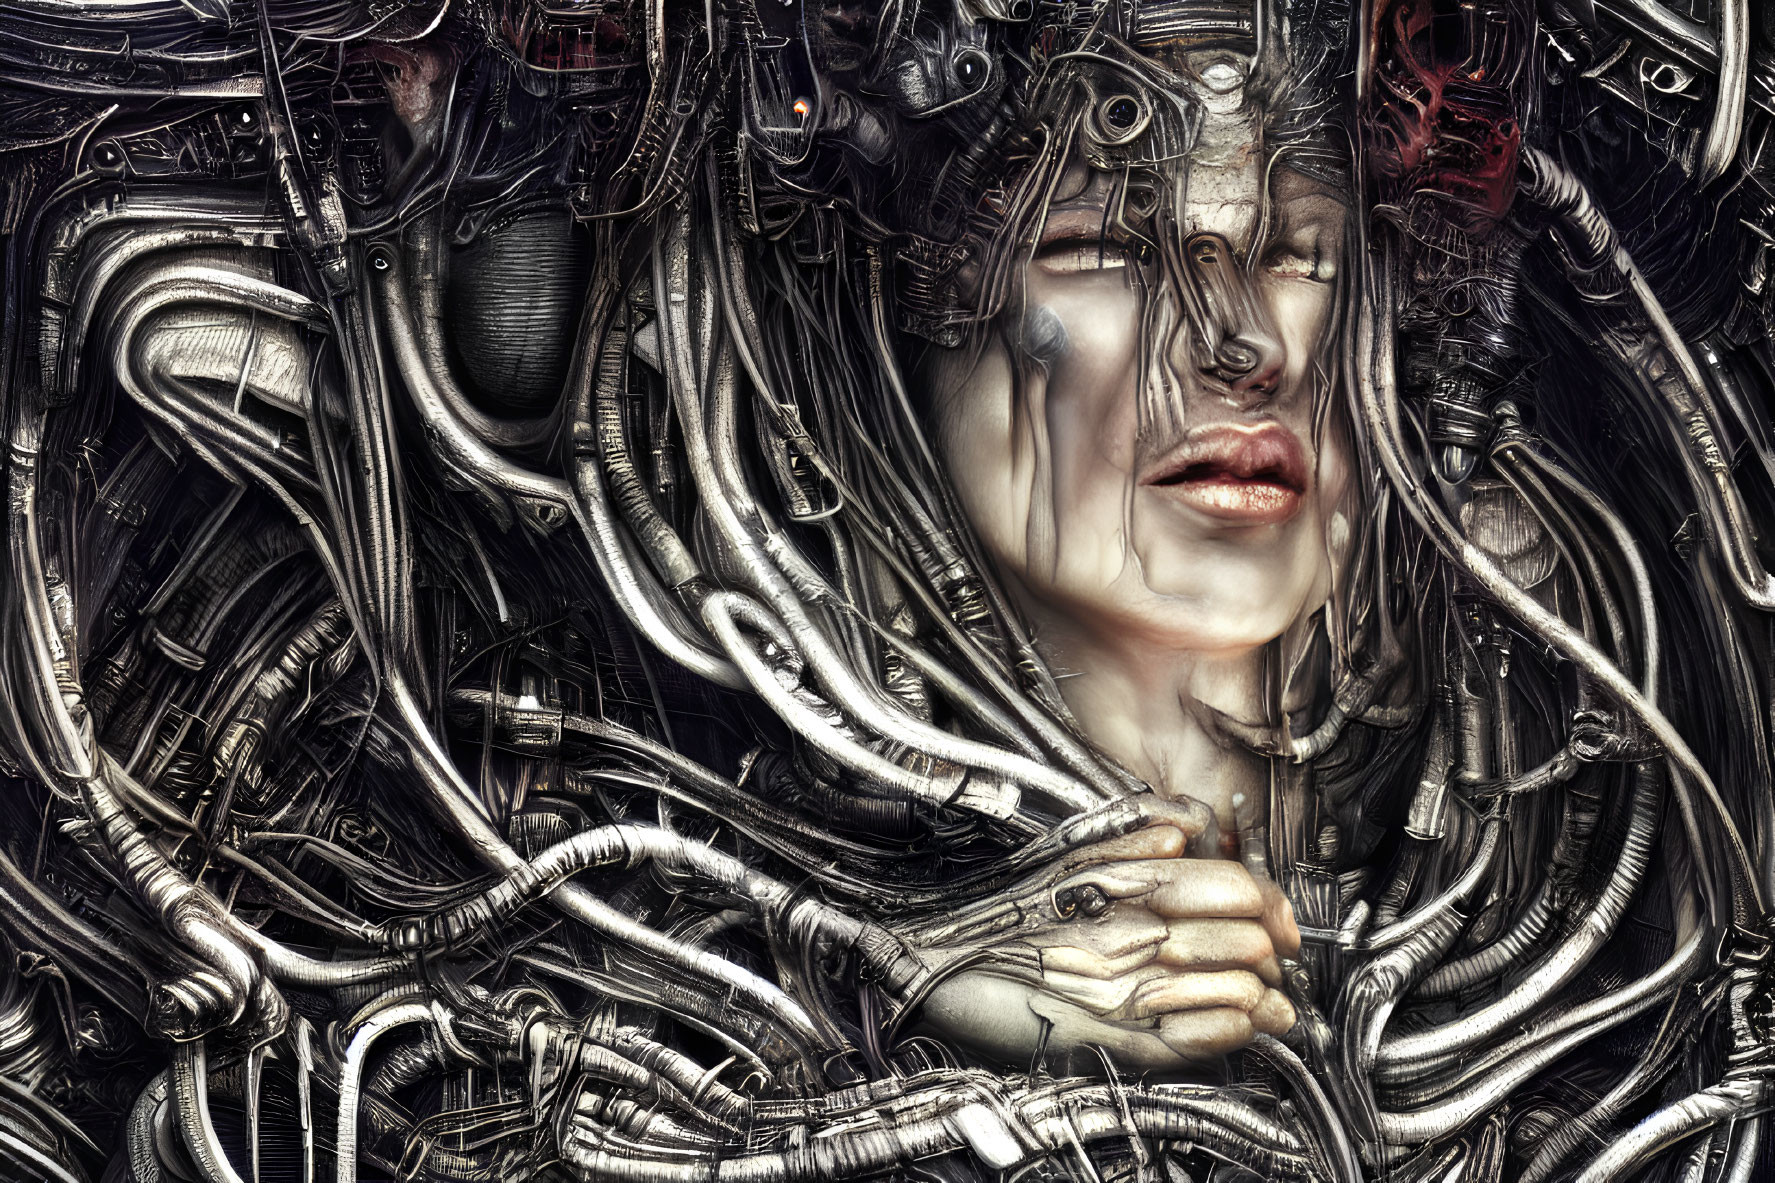 Hyper-realistic digital artwork: Woman's face and hand intertwined with mechanical cables and components